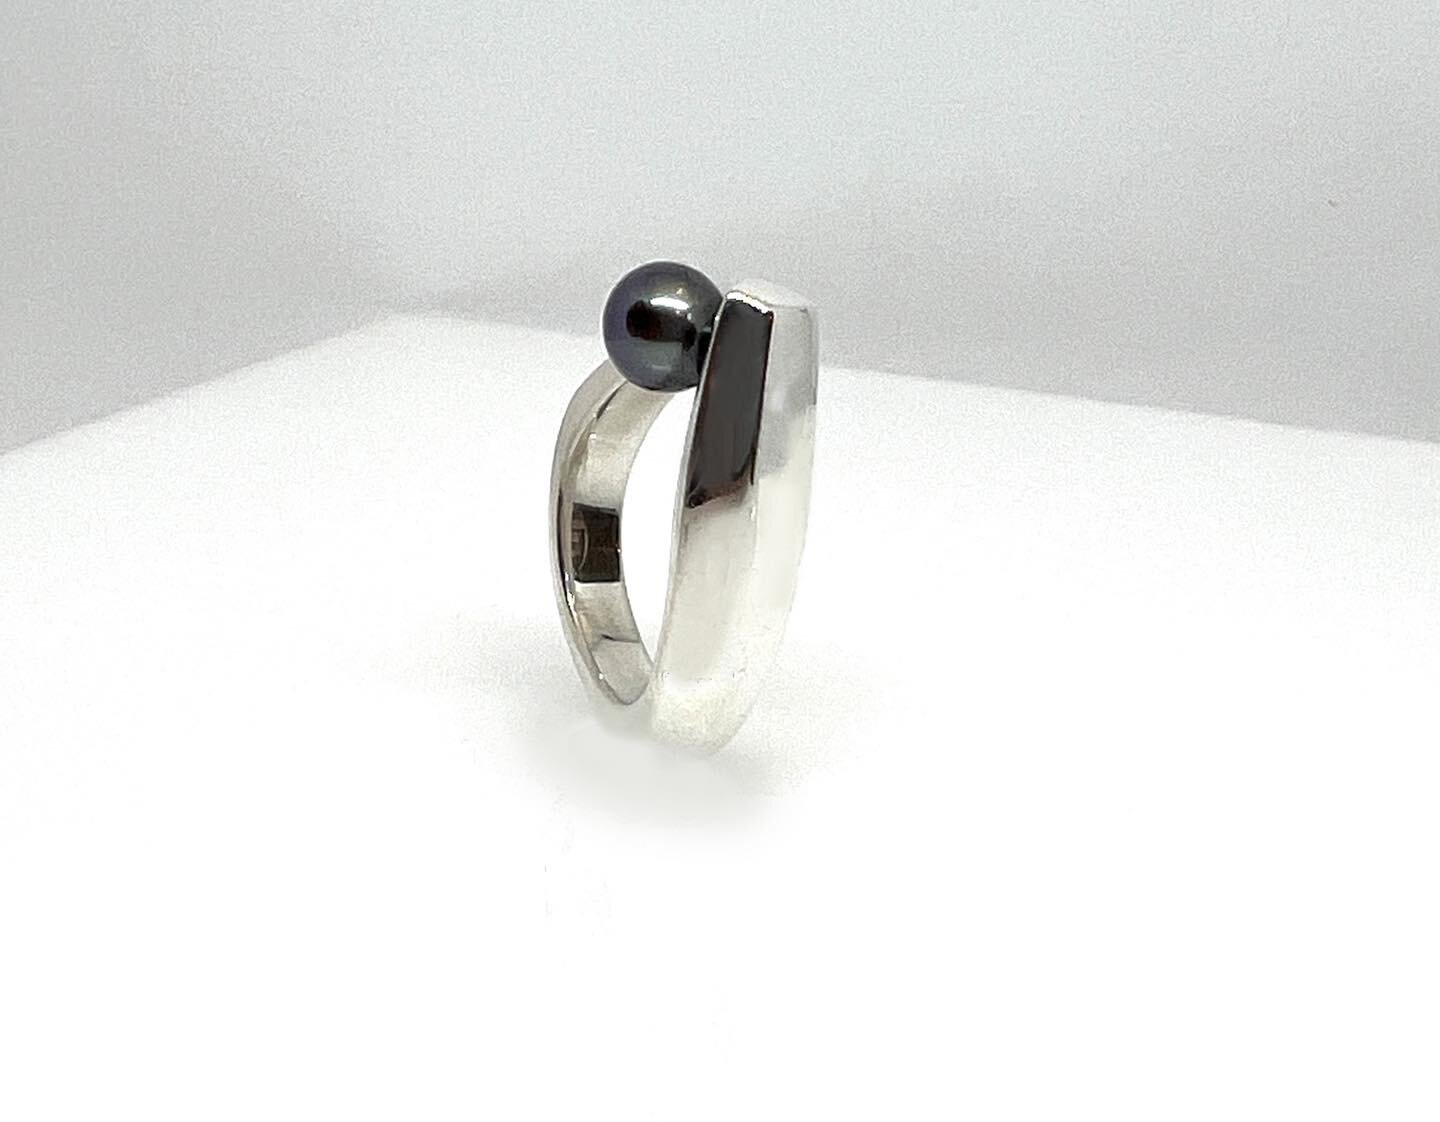 Sculptural wave ring in silver with black pearl.  Elegant and modern with a sleek high polish finish. 

#modernjewelrydesign #minimalist #minimalistdesign #sculpturaljewelry #sculpturaljewelrydesign #quietluxury #ContemporaryDesign #giftideas #blackp